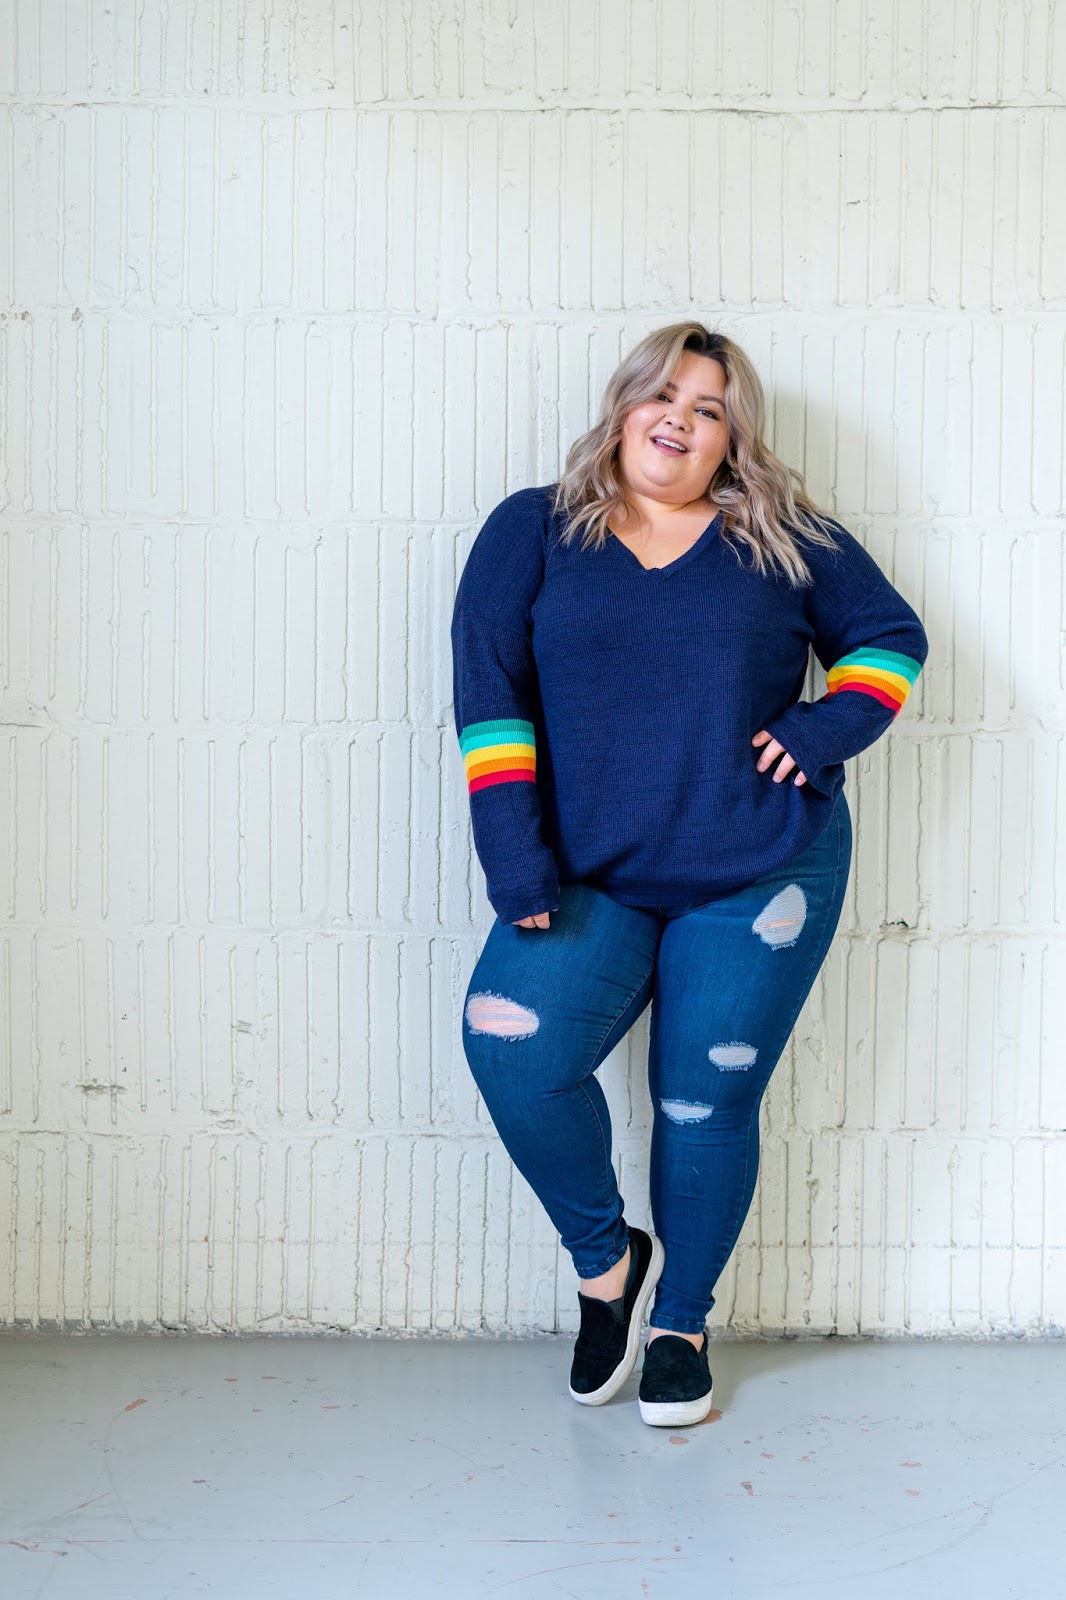 Chicago Plus Size Petite Fashion Blogger and model Natalie Craig, of Natalie in the City, compares Stitch Fix and Dia & Co styling services to find the best one for plus sizes.